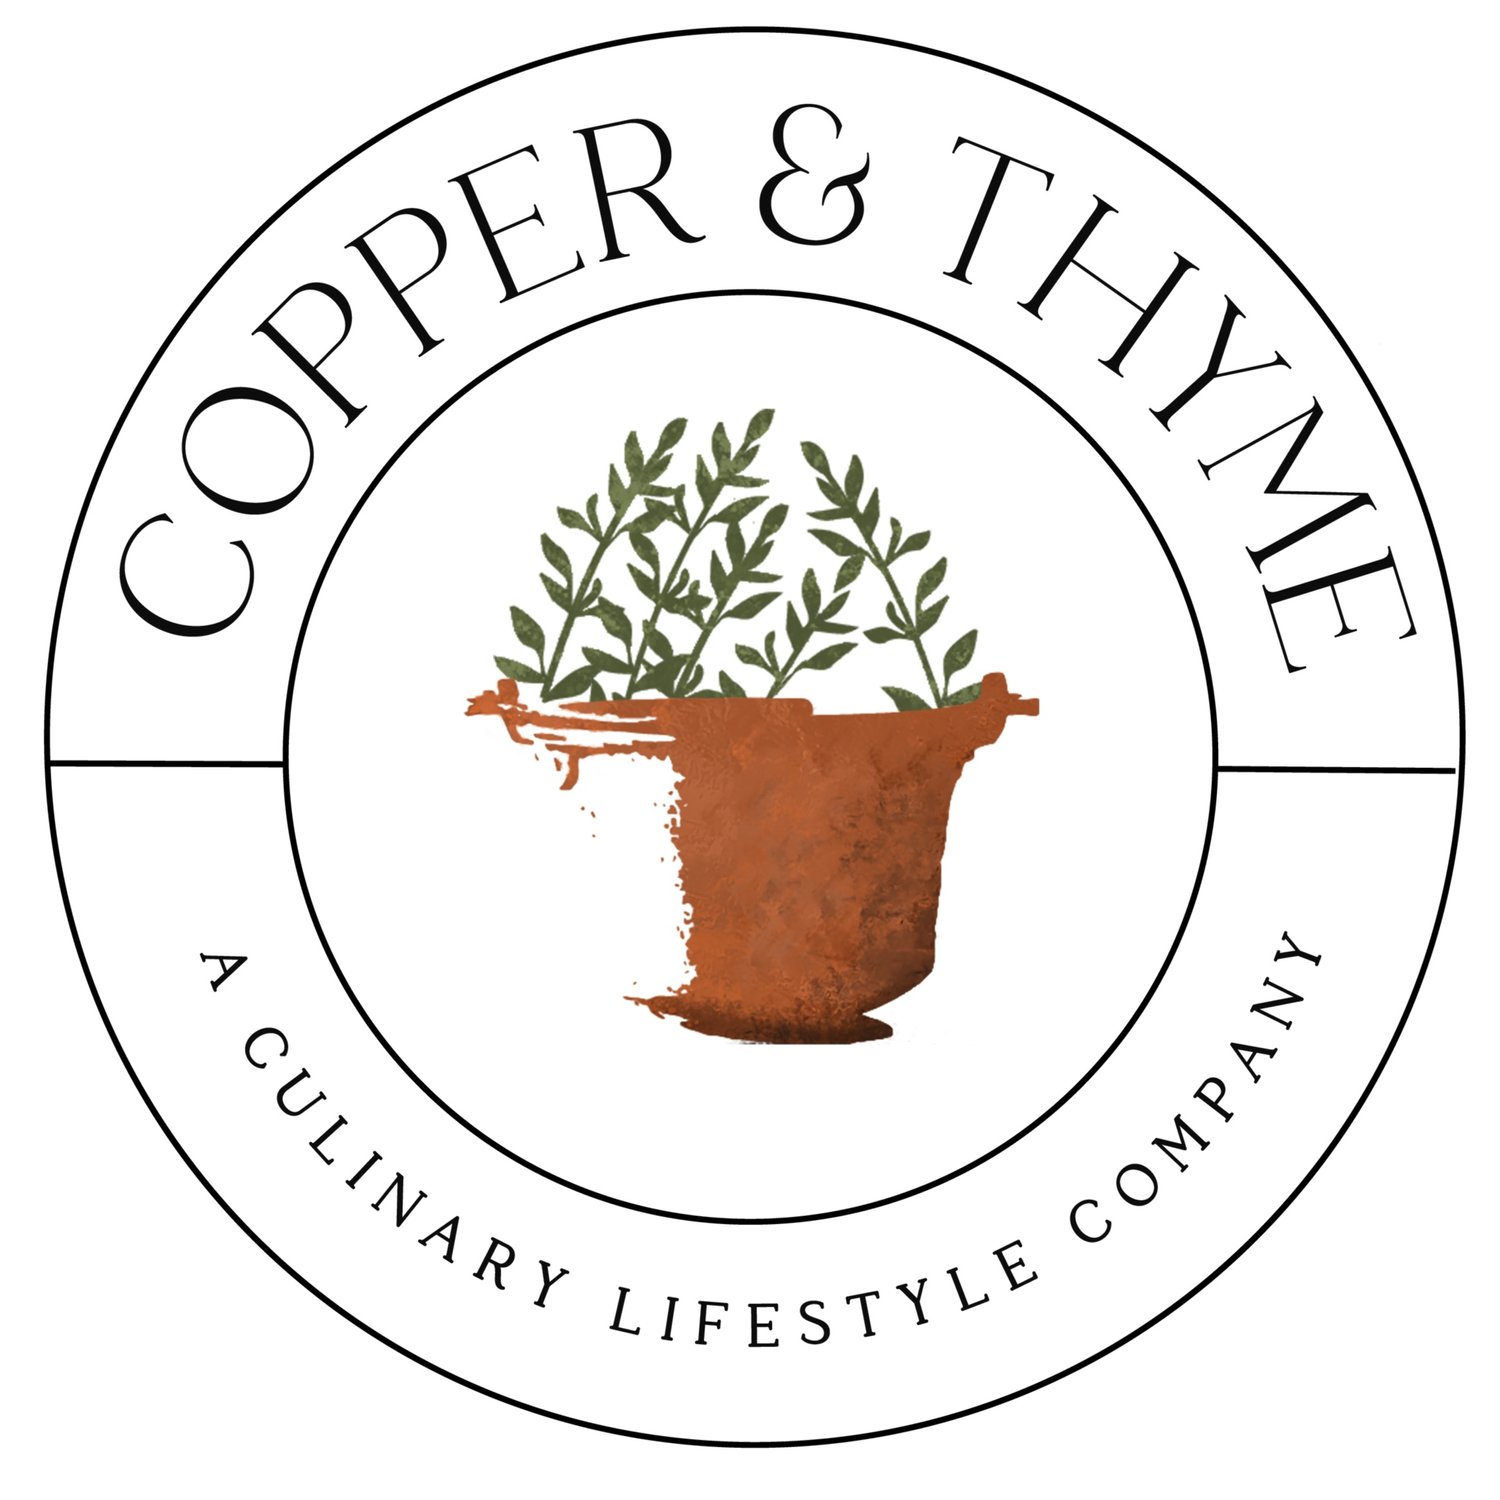 Copper &amp; Thyme Personal Chef services, boutique catering, and cooking classes